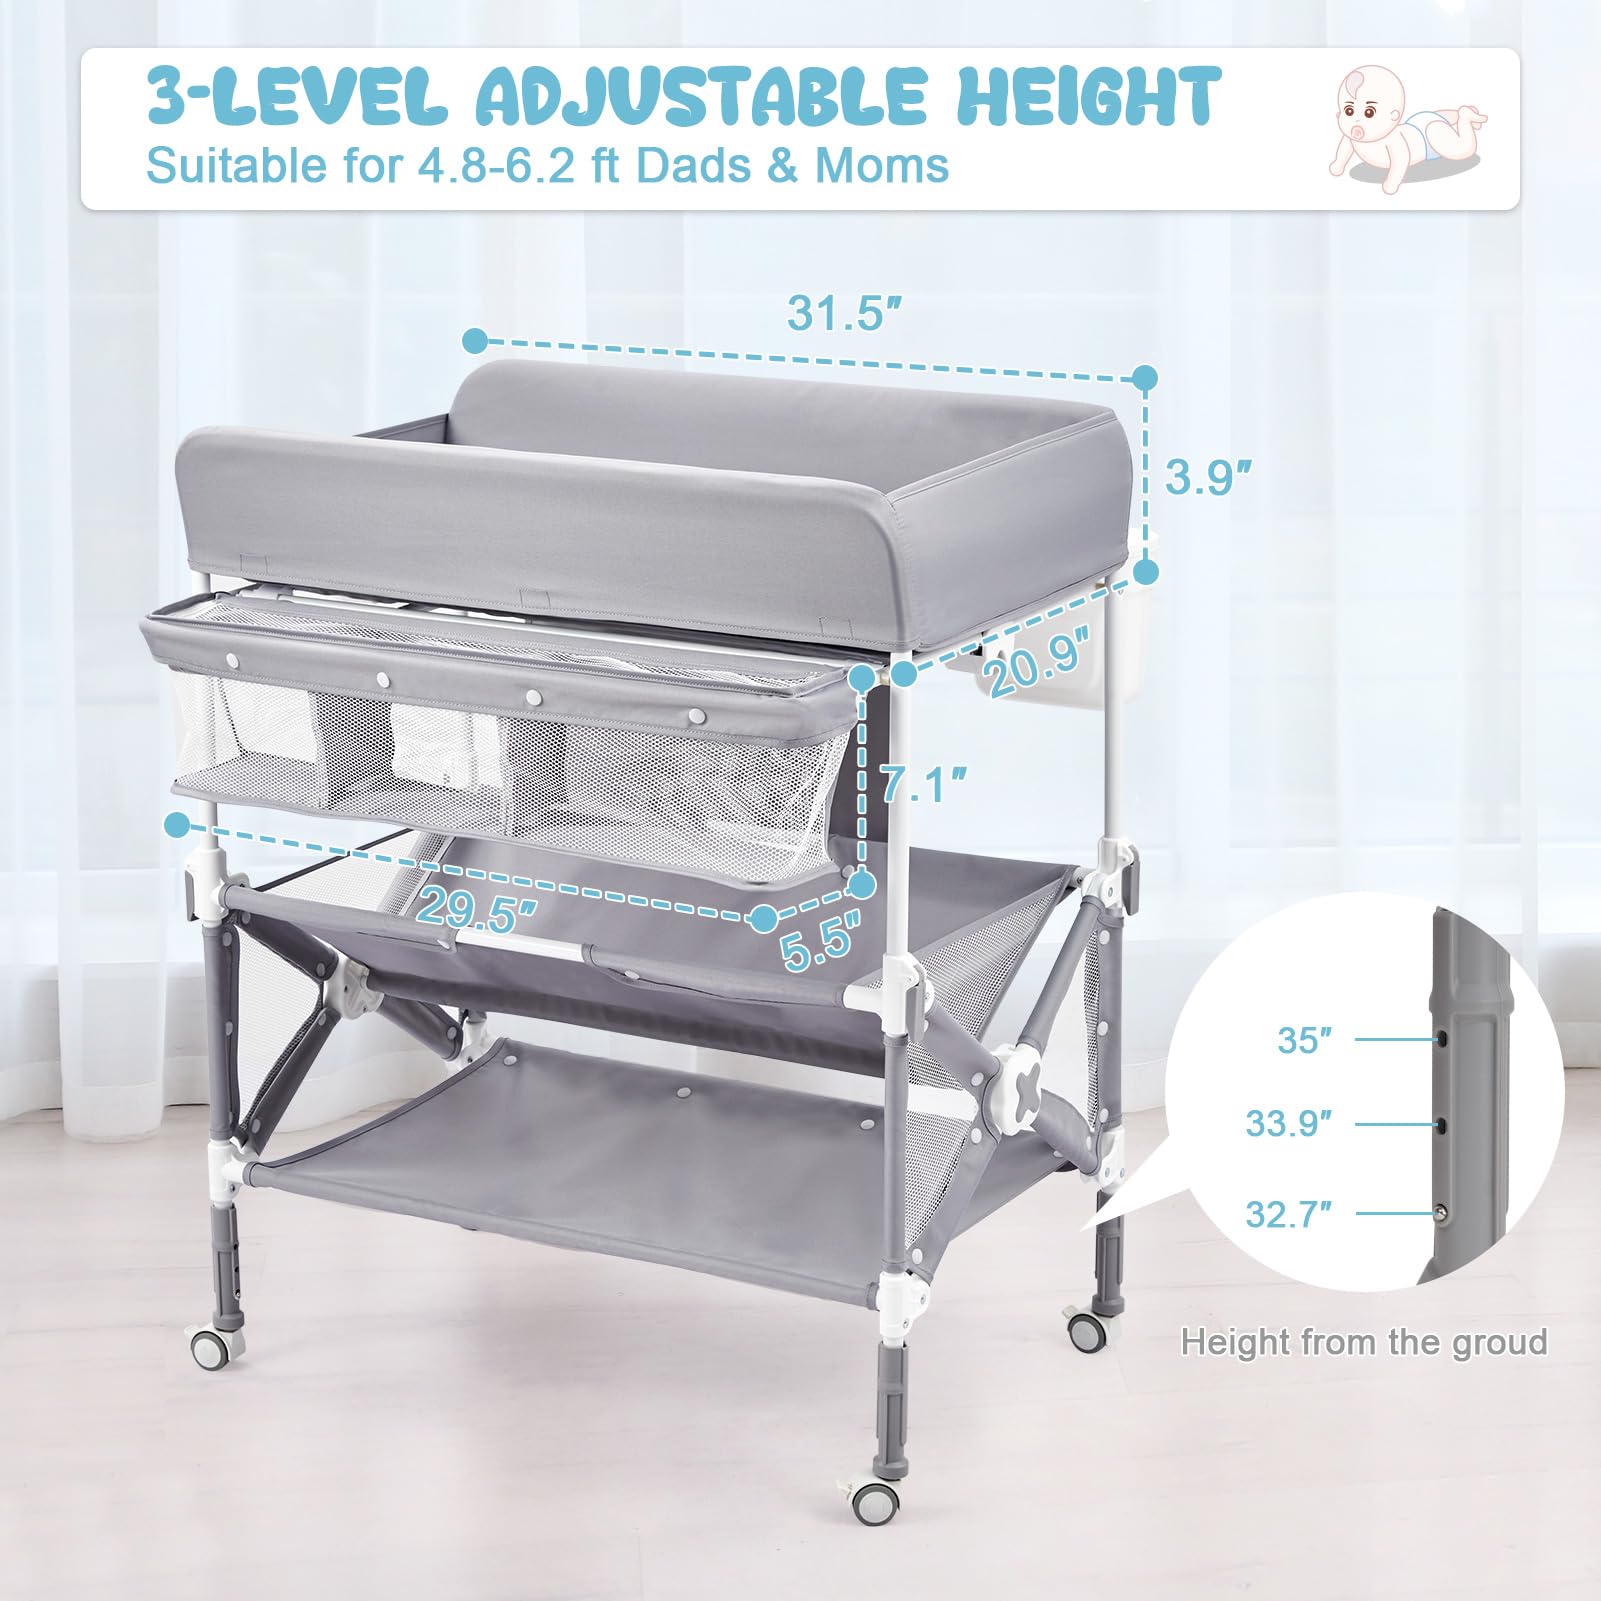 Portable Baby Changing Table, Foldable Diaper Change Table with Wheels, Adjustable Height, Cleaning Bucket, Changing Station for Infant Mobile Nursery Organizer for Newborn